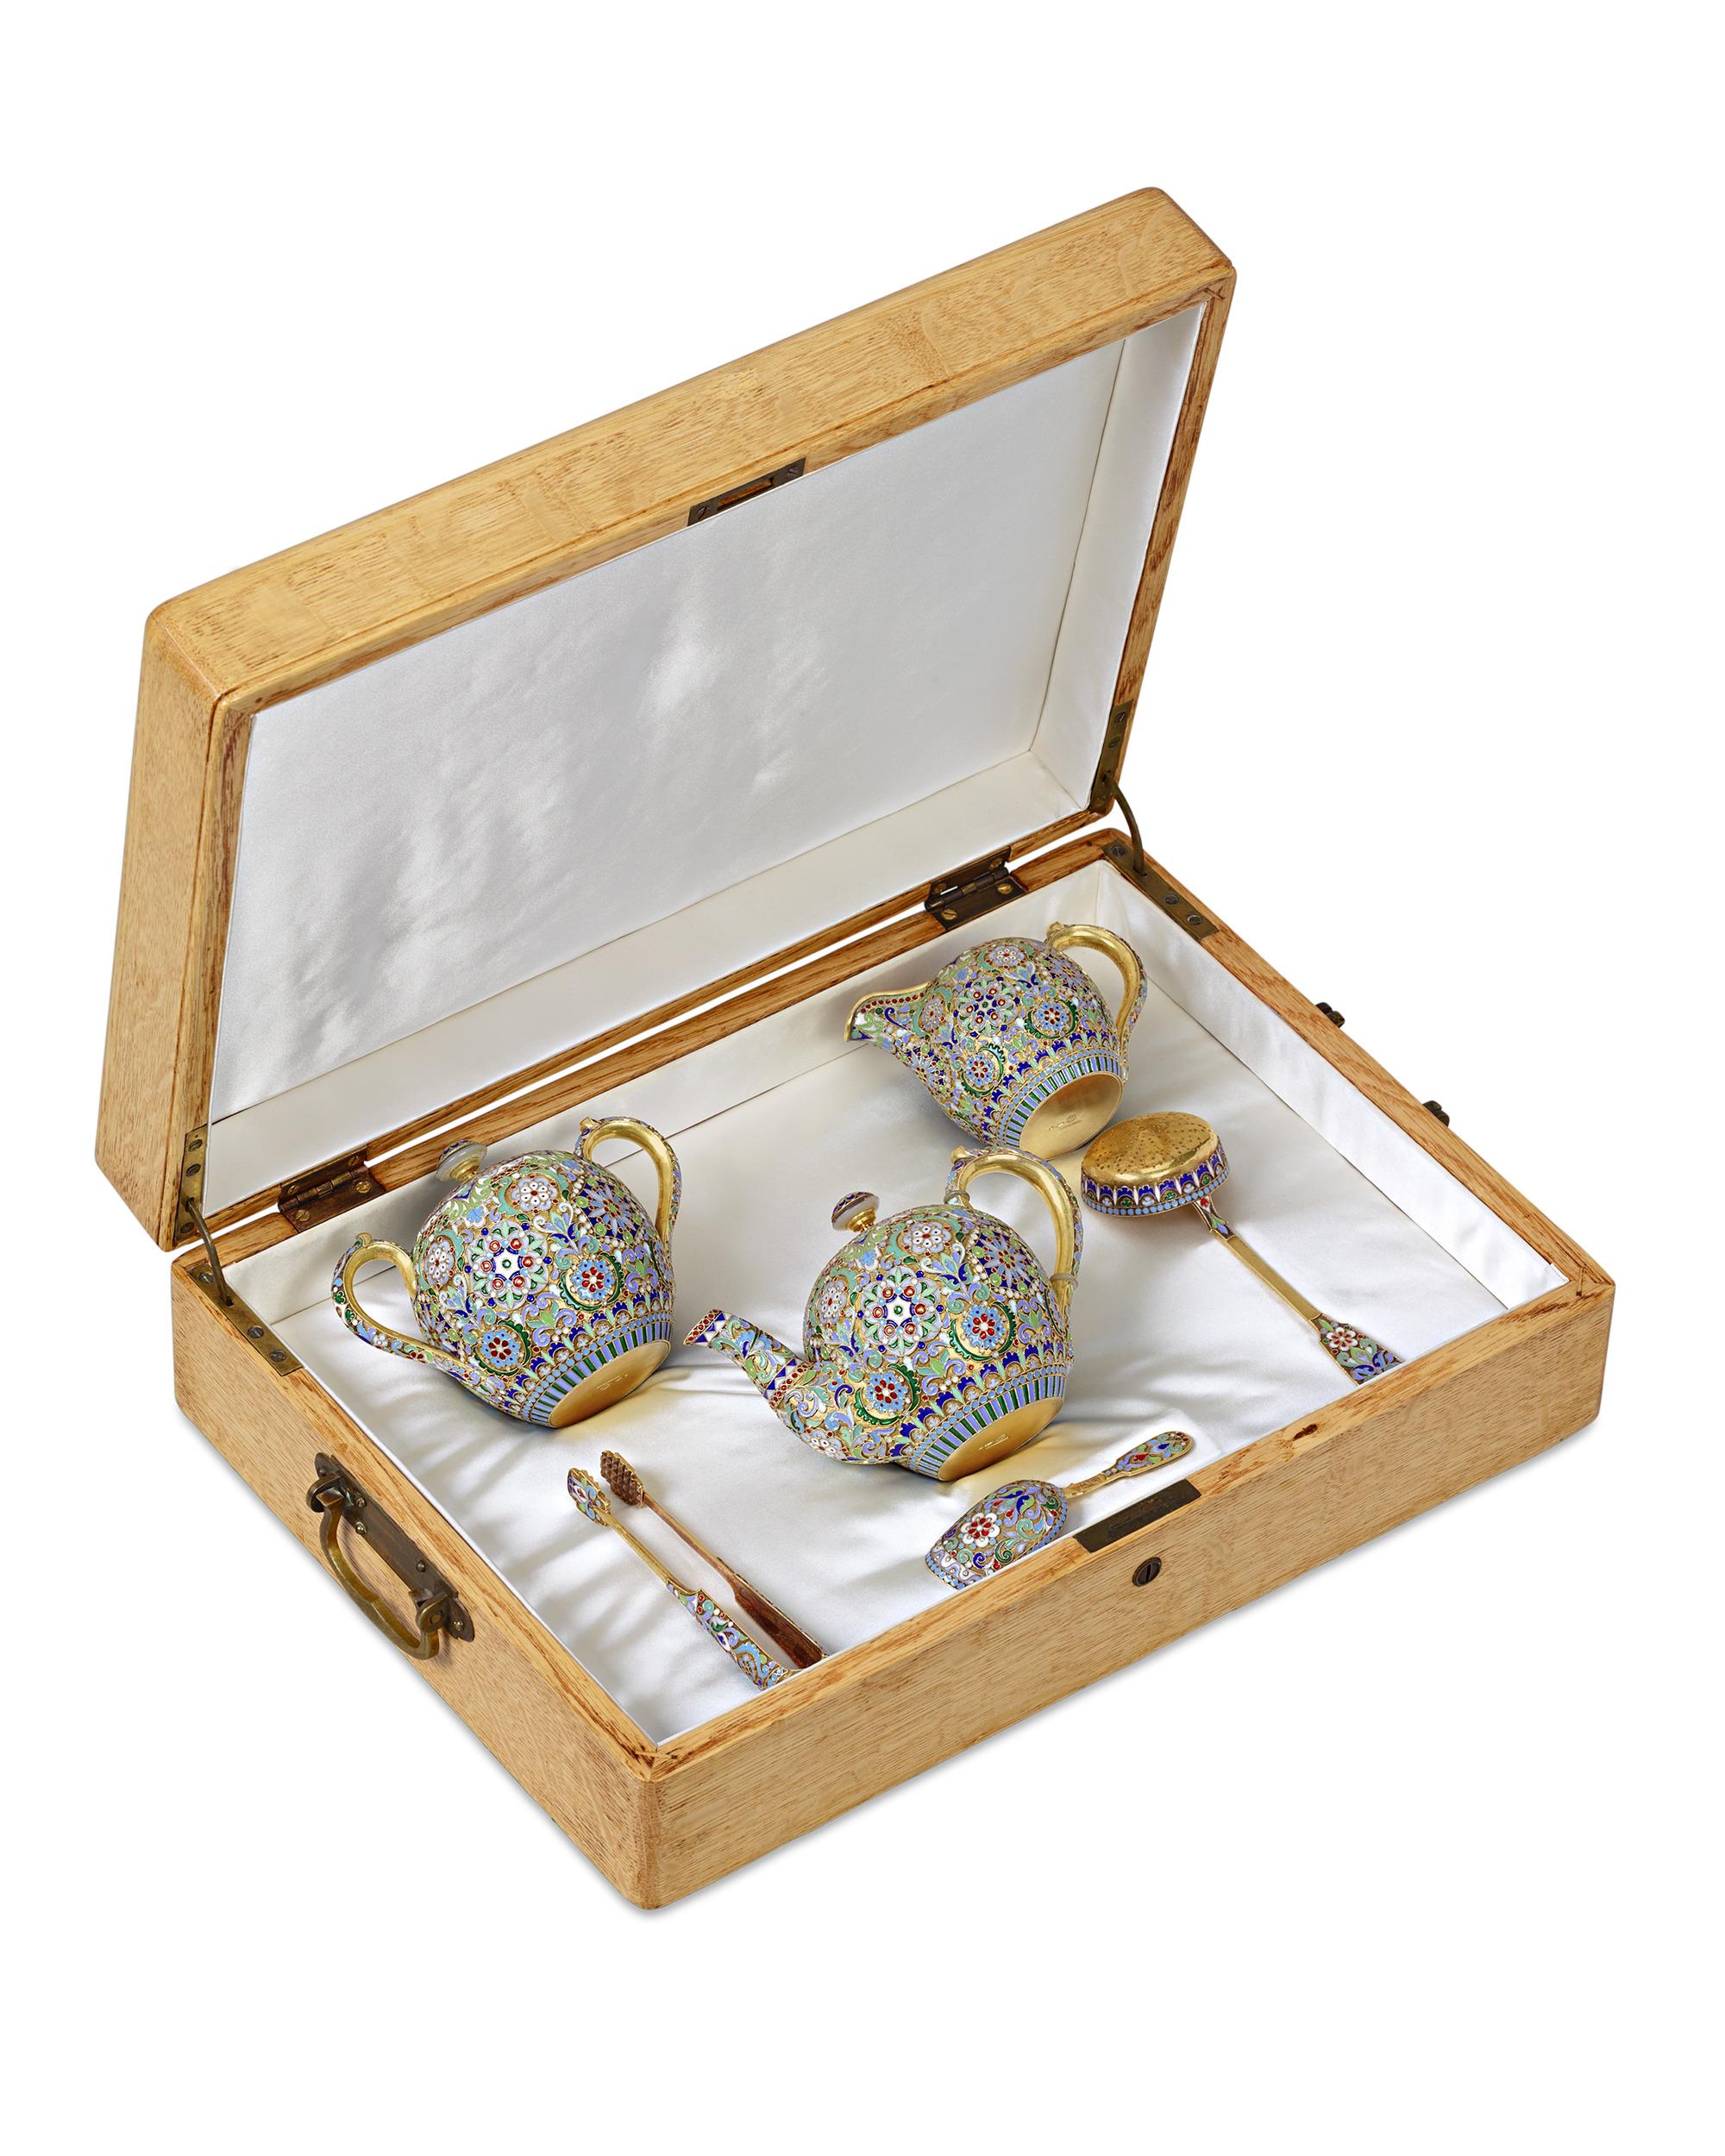 This exceptional Russian cloisonné and enamel tea set is the work of Pavel Akimovich Ovchinnikov. One of Russia’s most skilled enamel artisans, Ovchinnikov is credited with marrying the champlevé, cloisonné and plique-à-jour enameling techniques